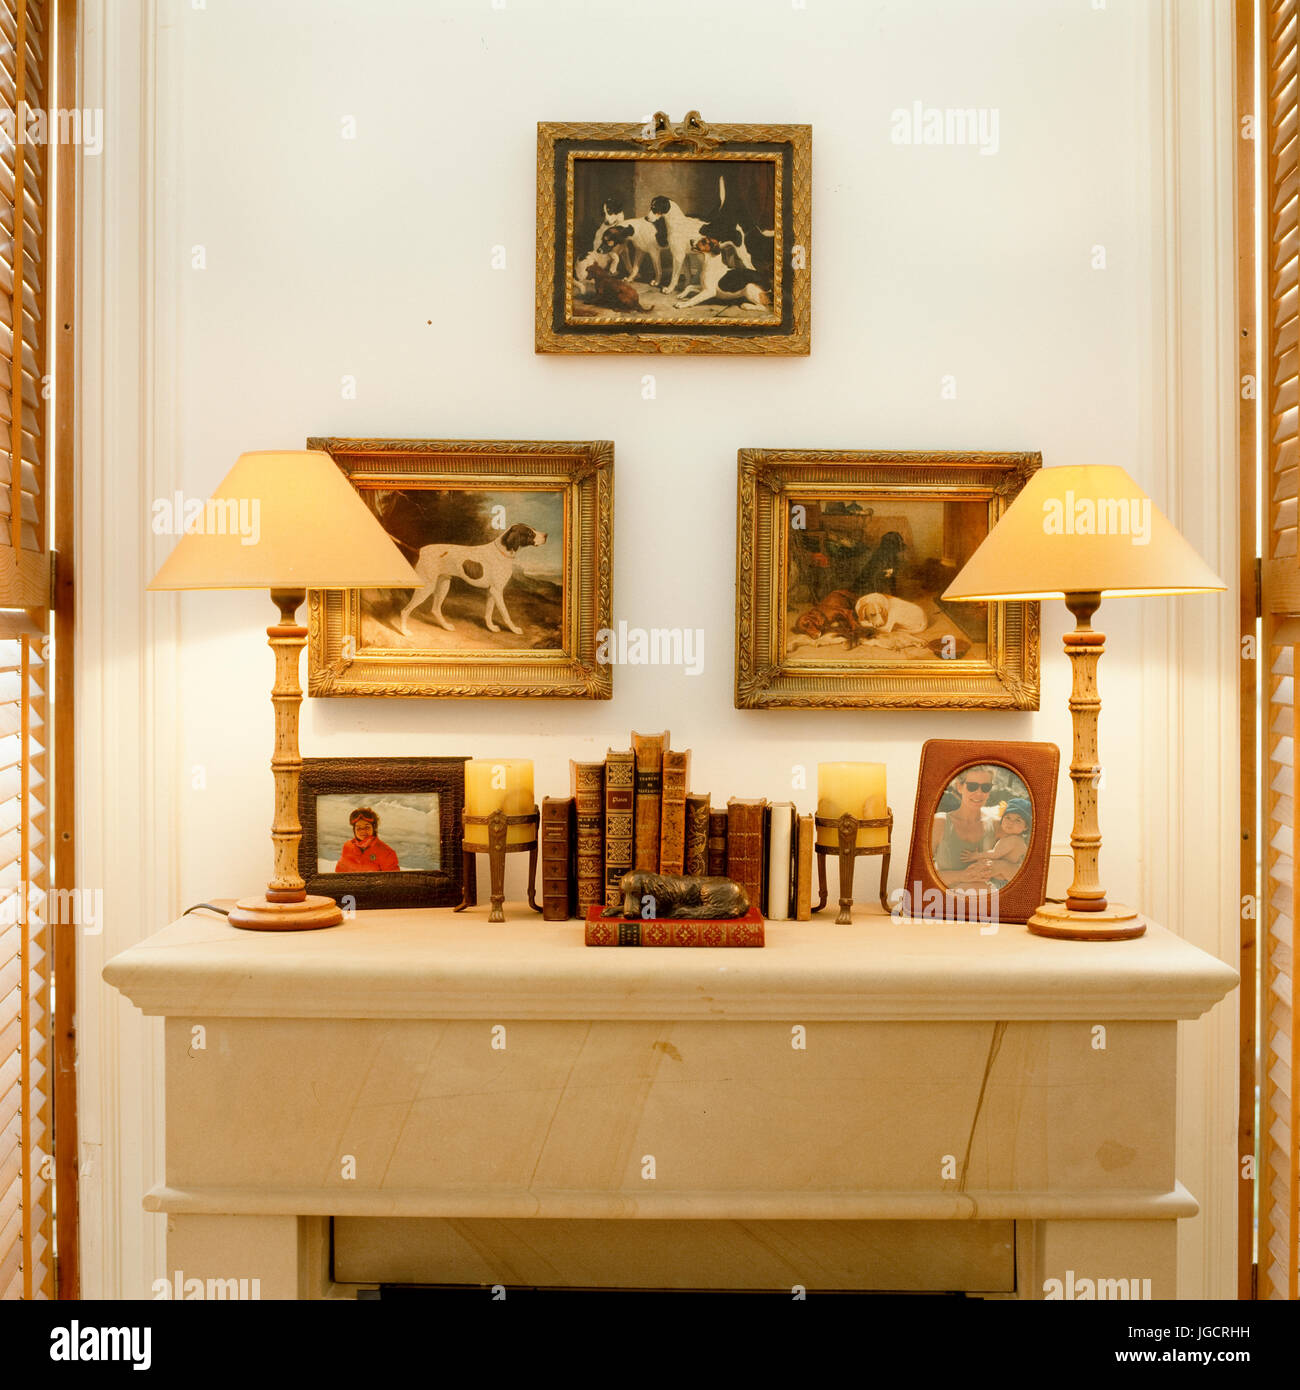 Mantelpiece with vintage lamps and art Stock Photo